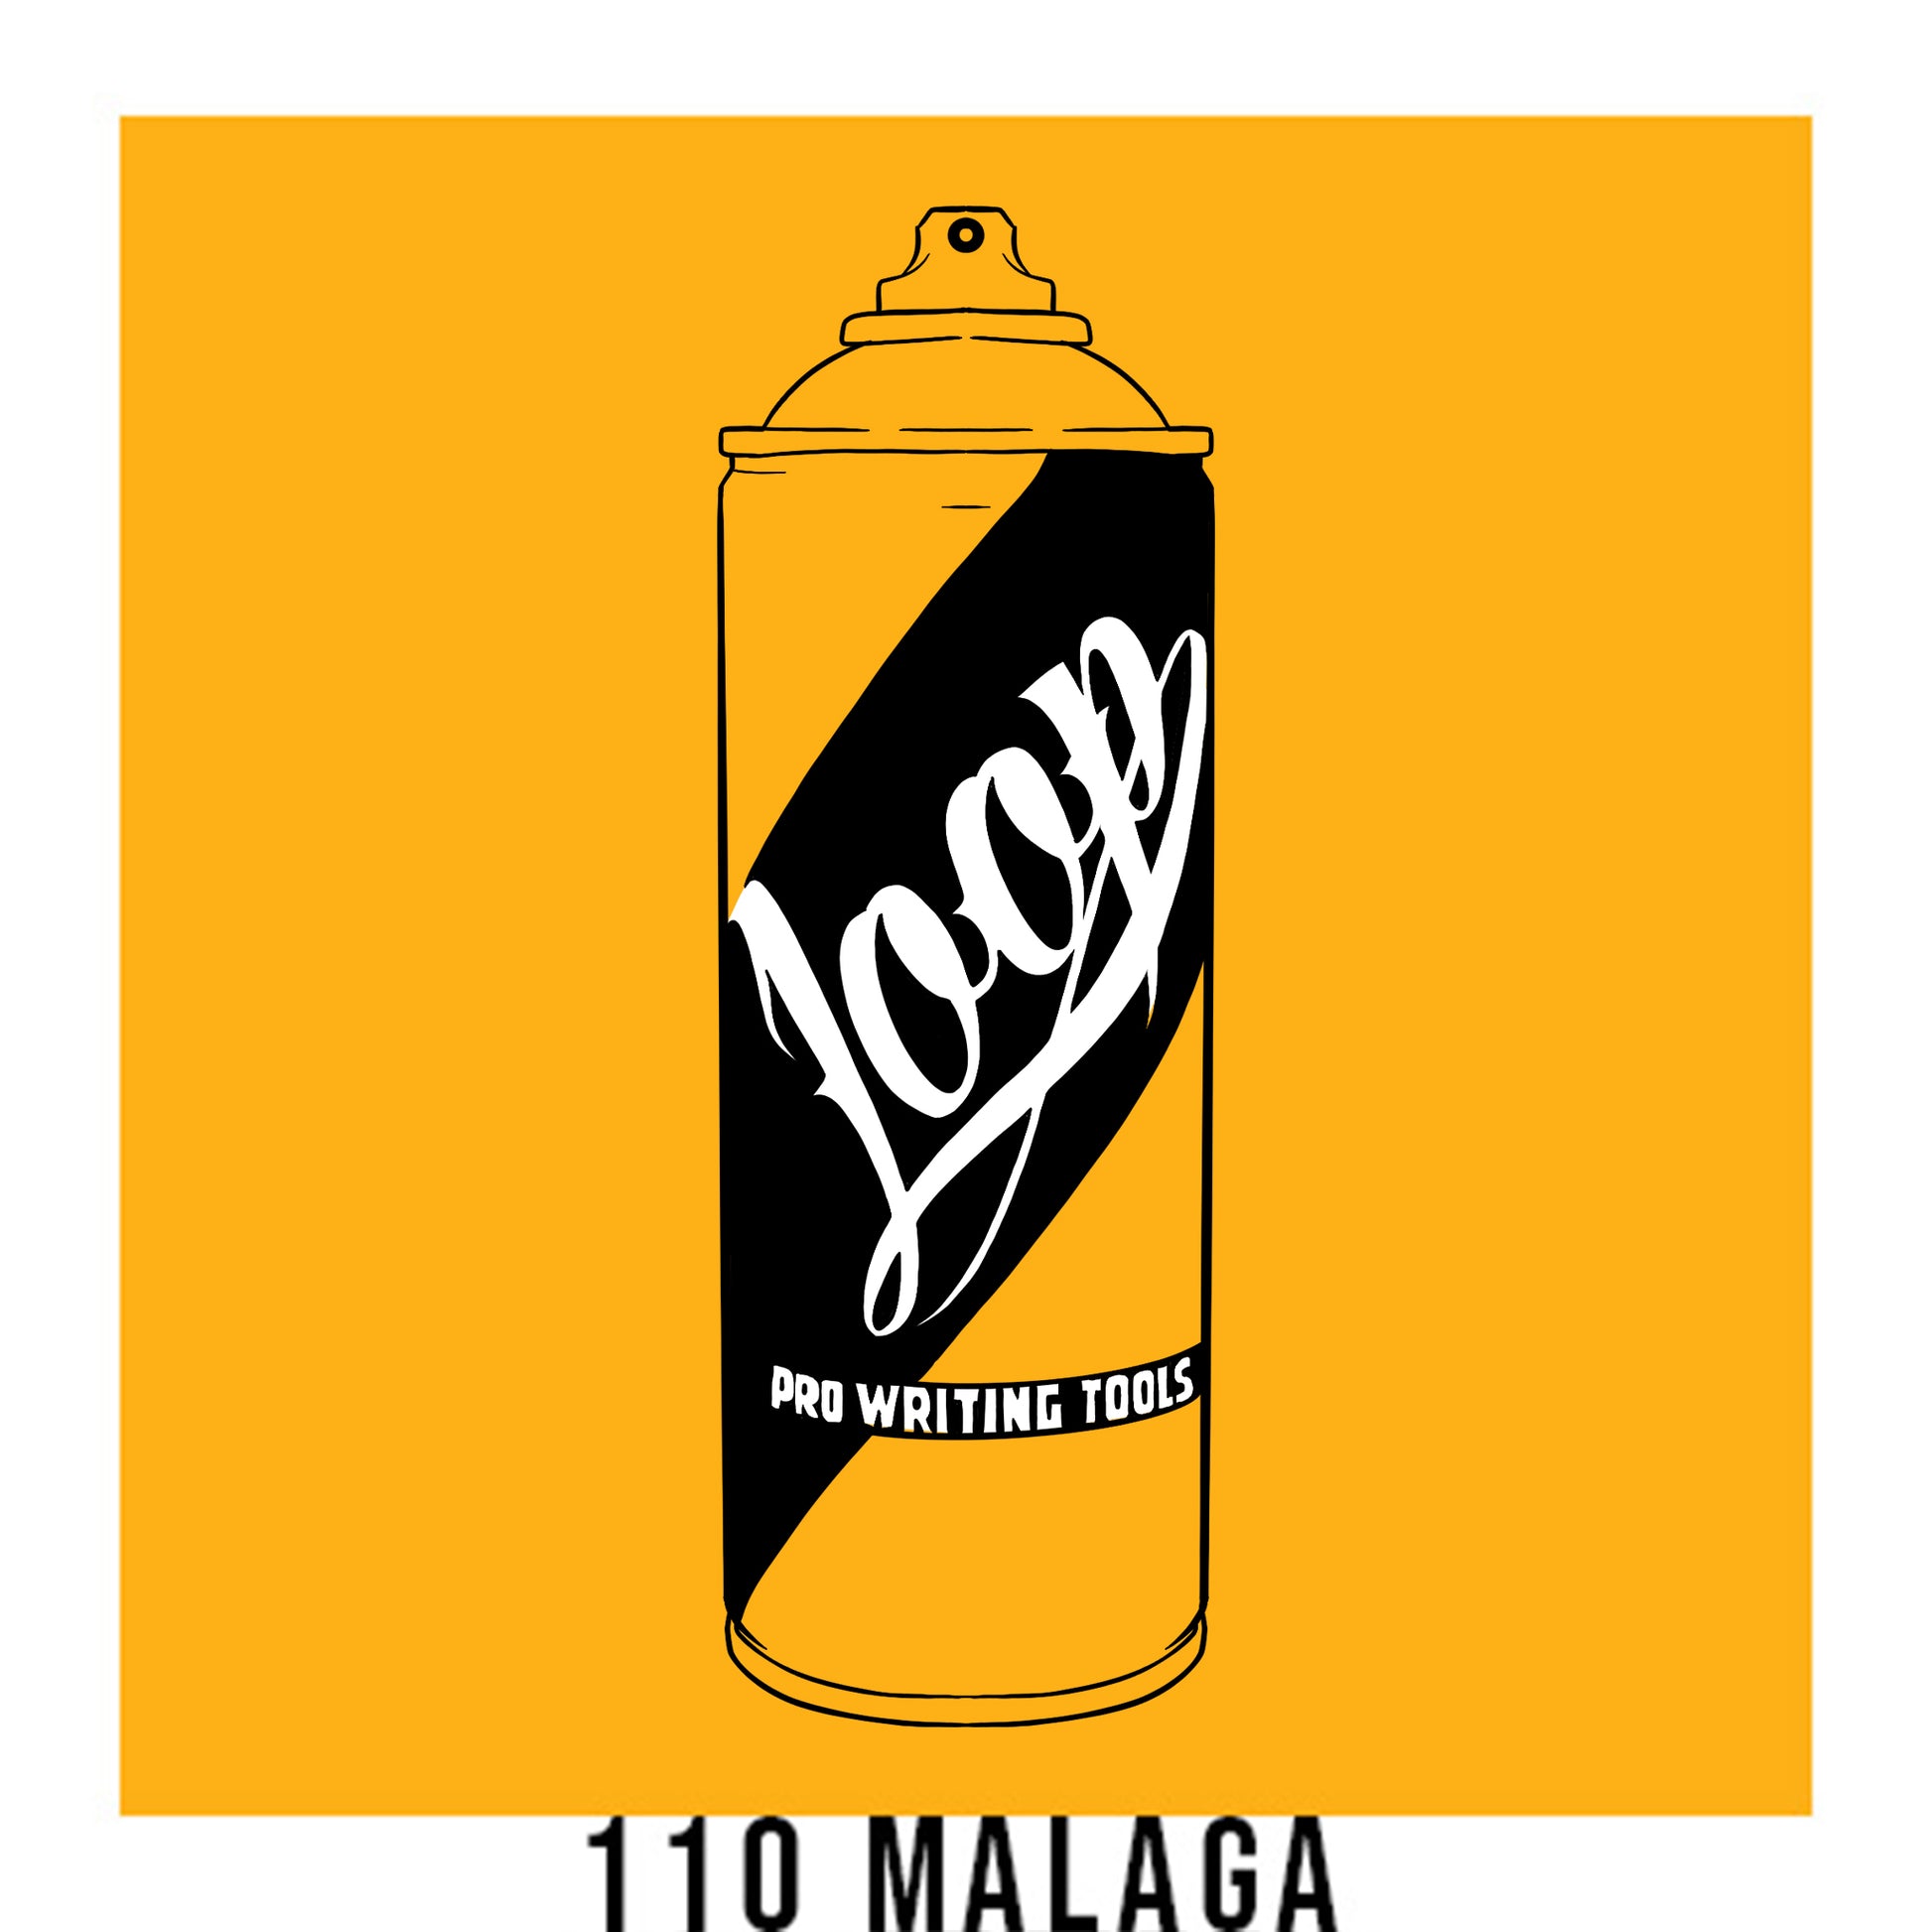 A black outline drawing of a golden yellow spray paint can with the word "Loop" written on the face in script. The background is a color swatch of the same yellow with a white border with the words "110 Malaga" at the bottom.